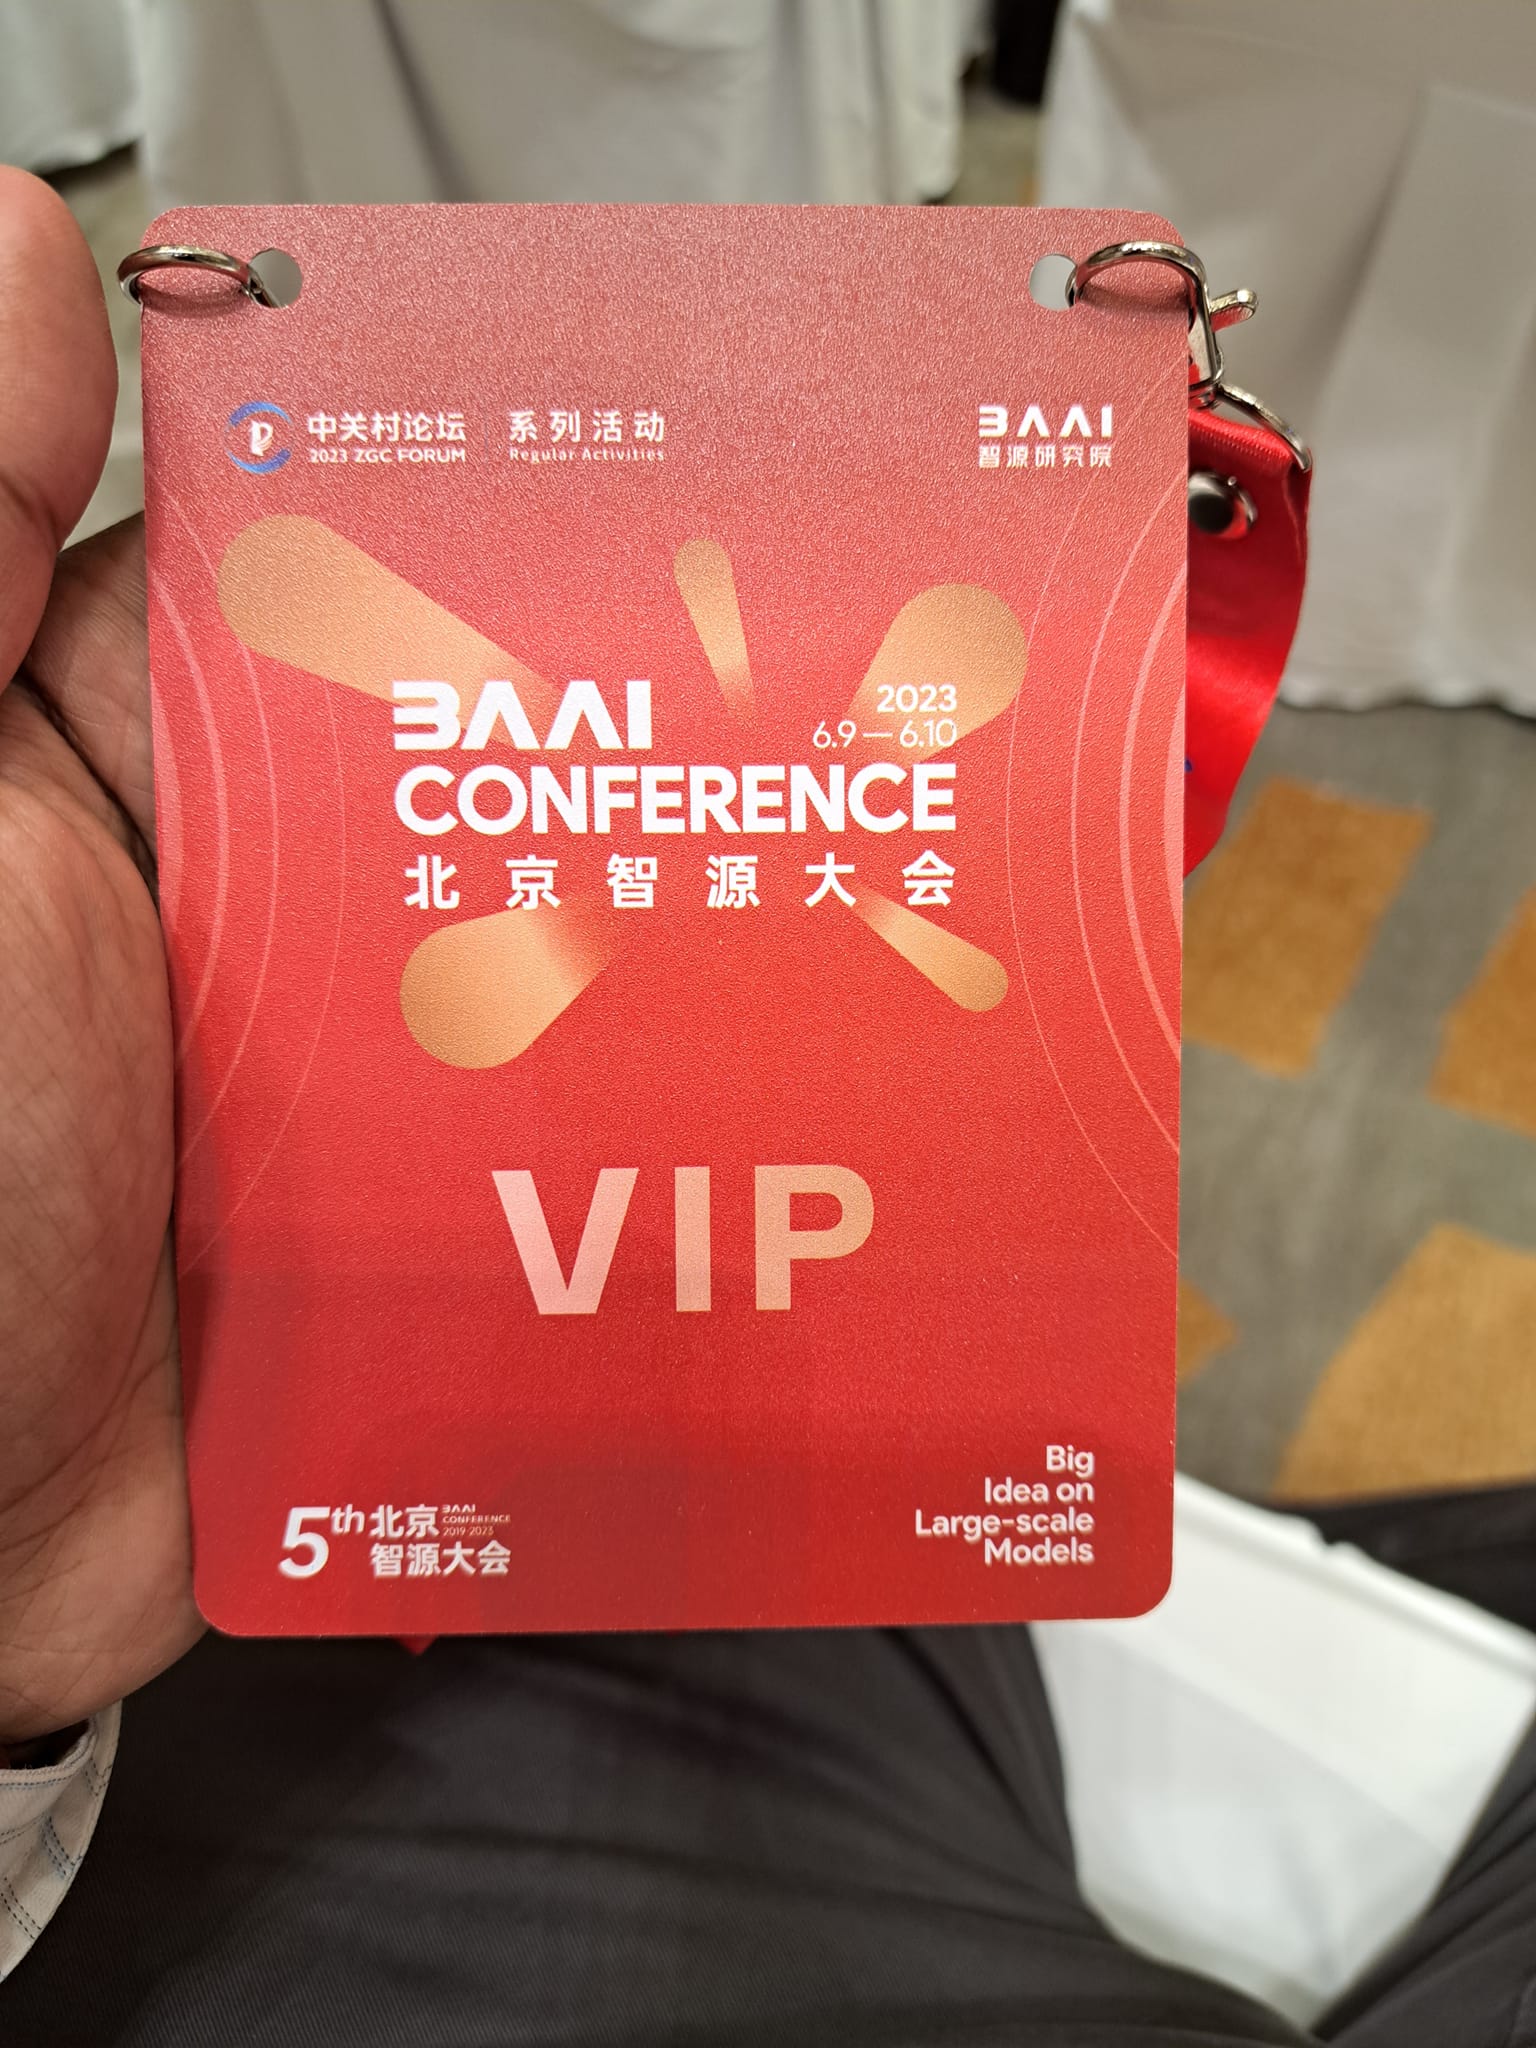 Dr. Ammar Younas attended BAAI Conference 2023 in Beijing China